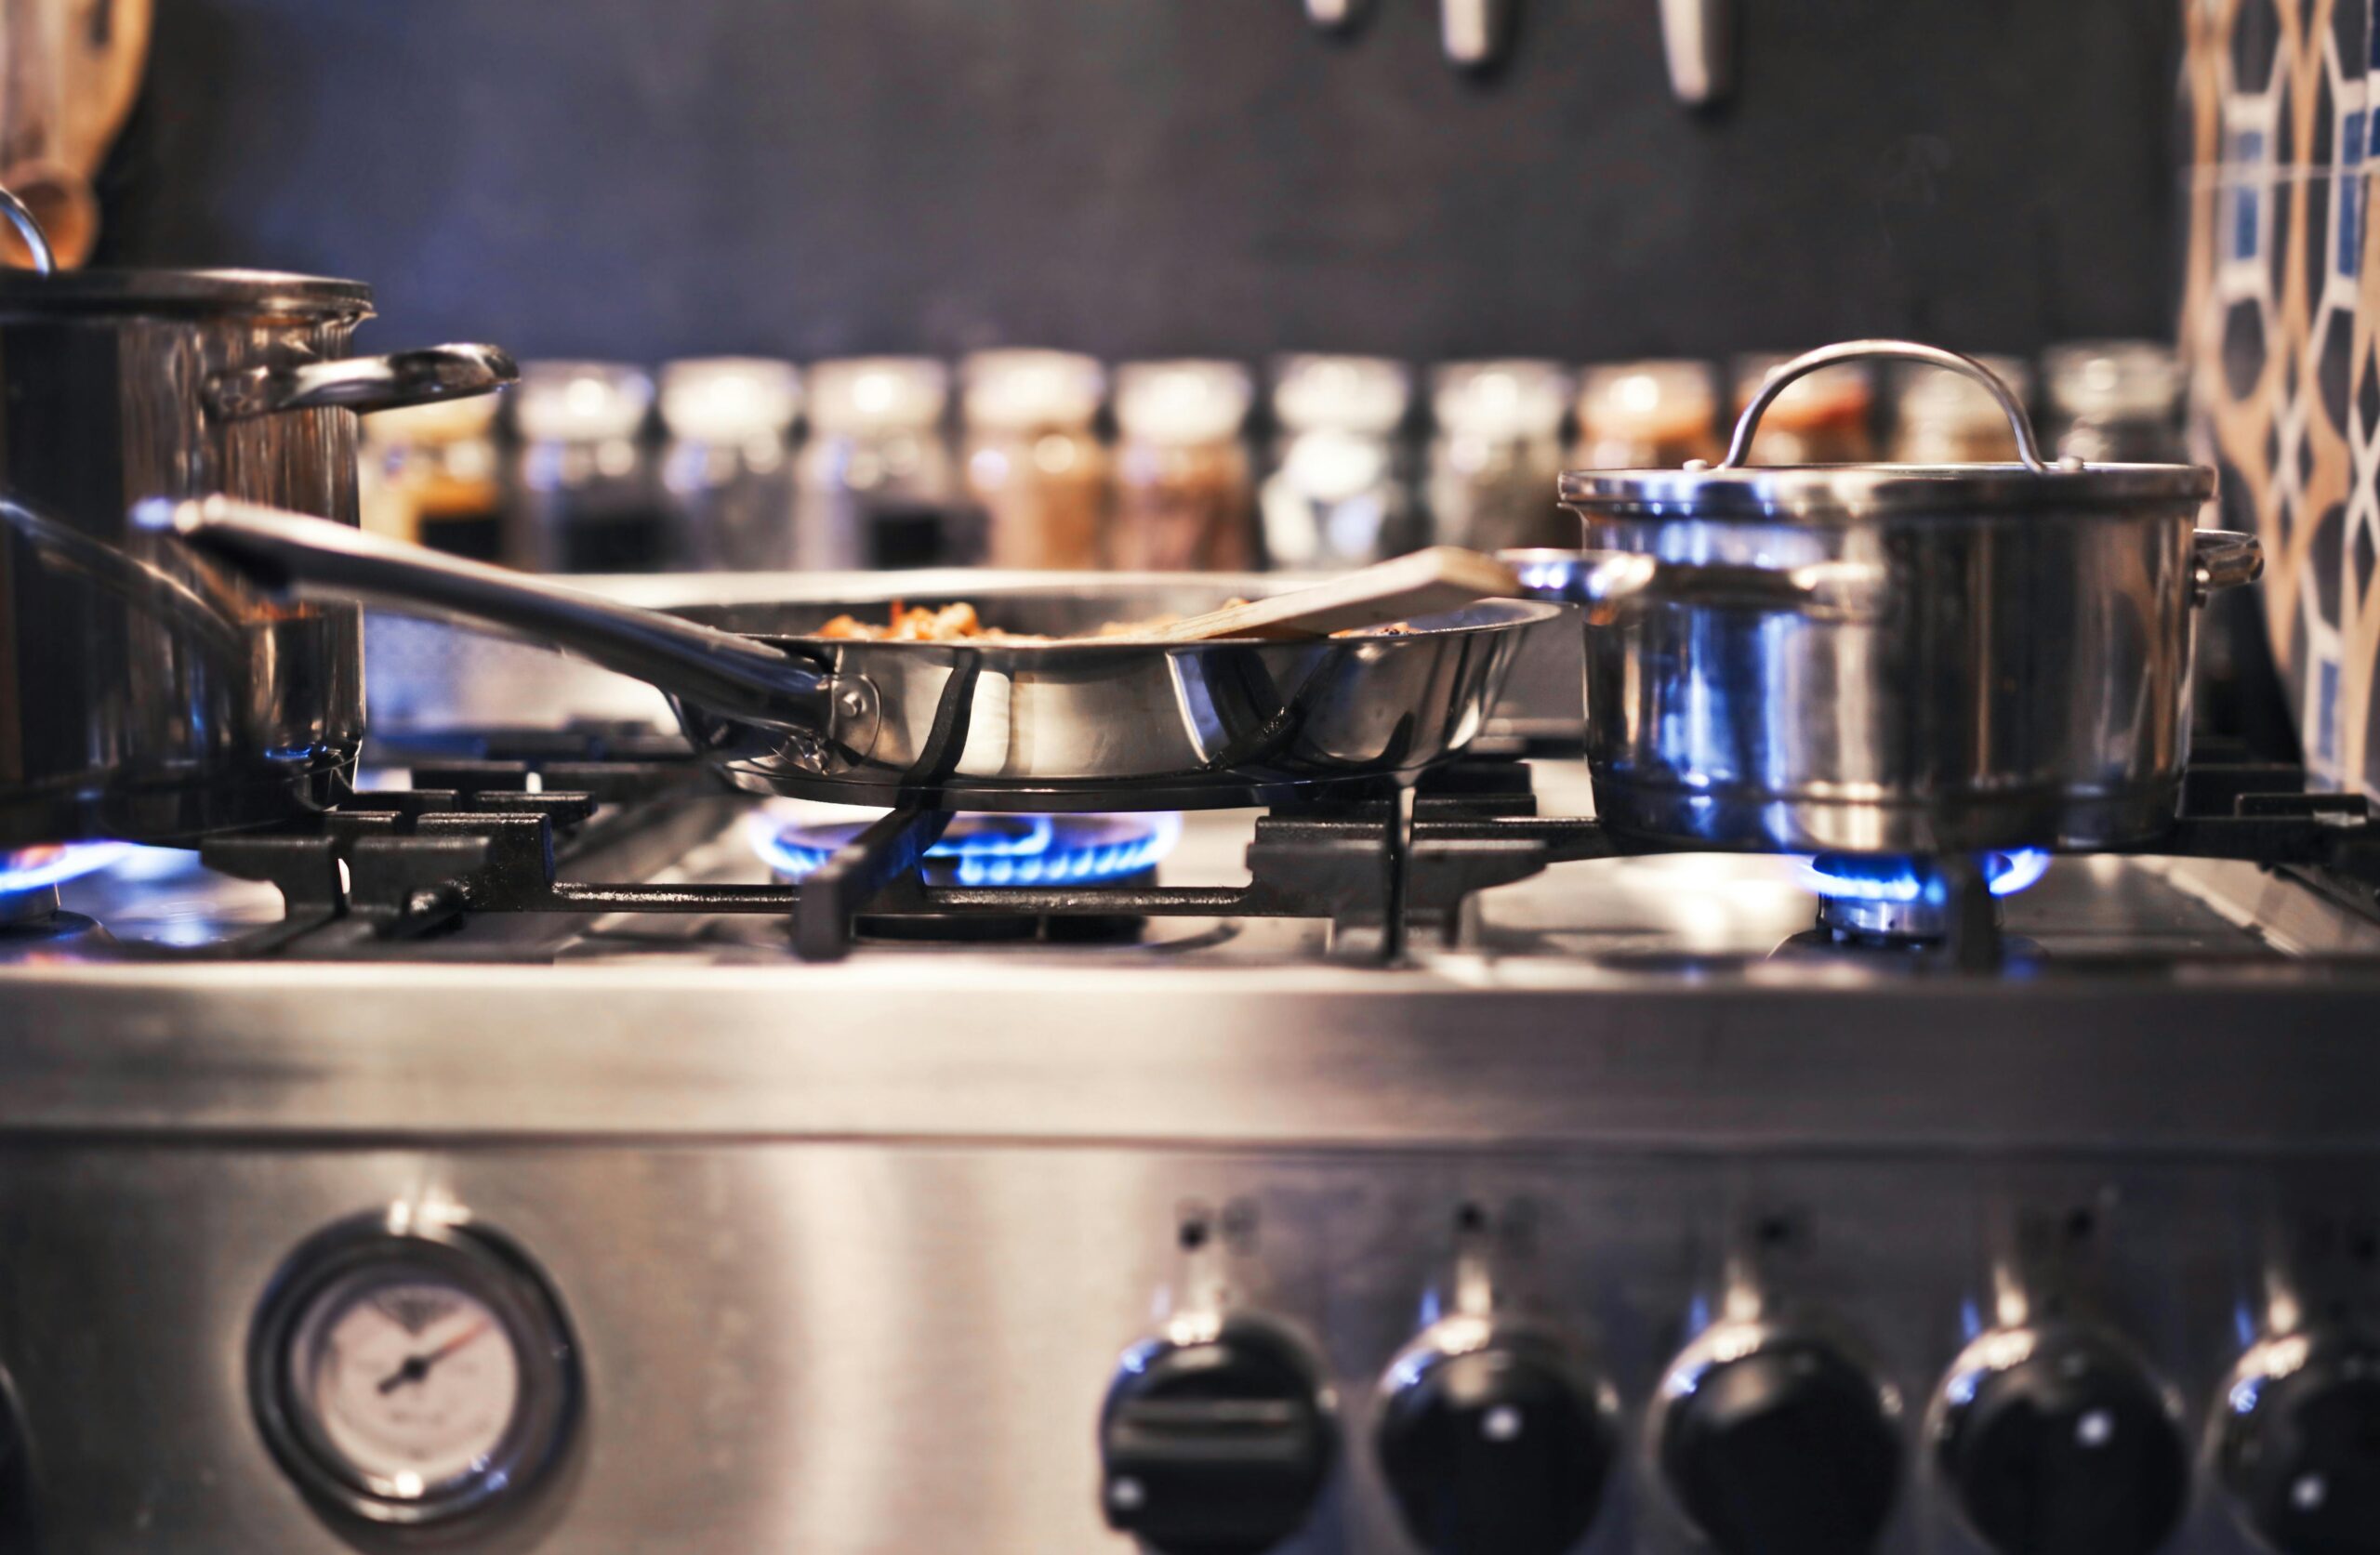 For stainless steel cookware, this set is one of the best for cooking on a gas stove. Pictured: stainless steel cookware on a stove